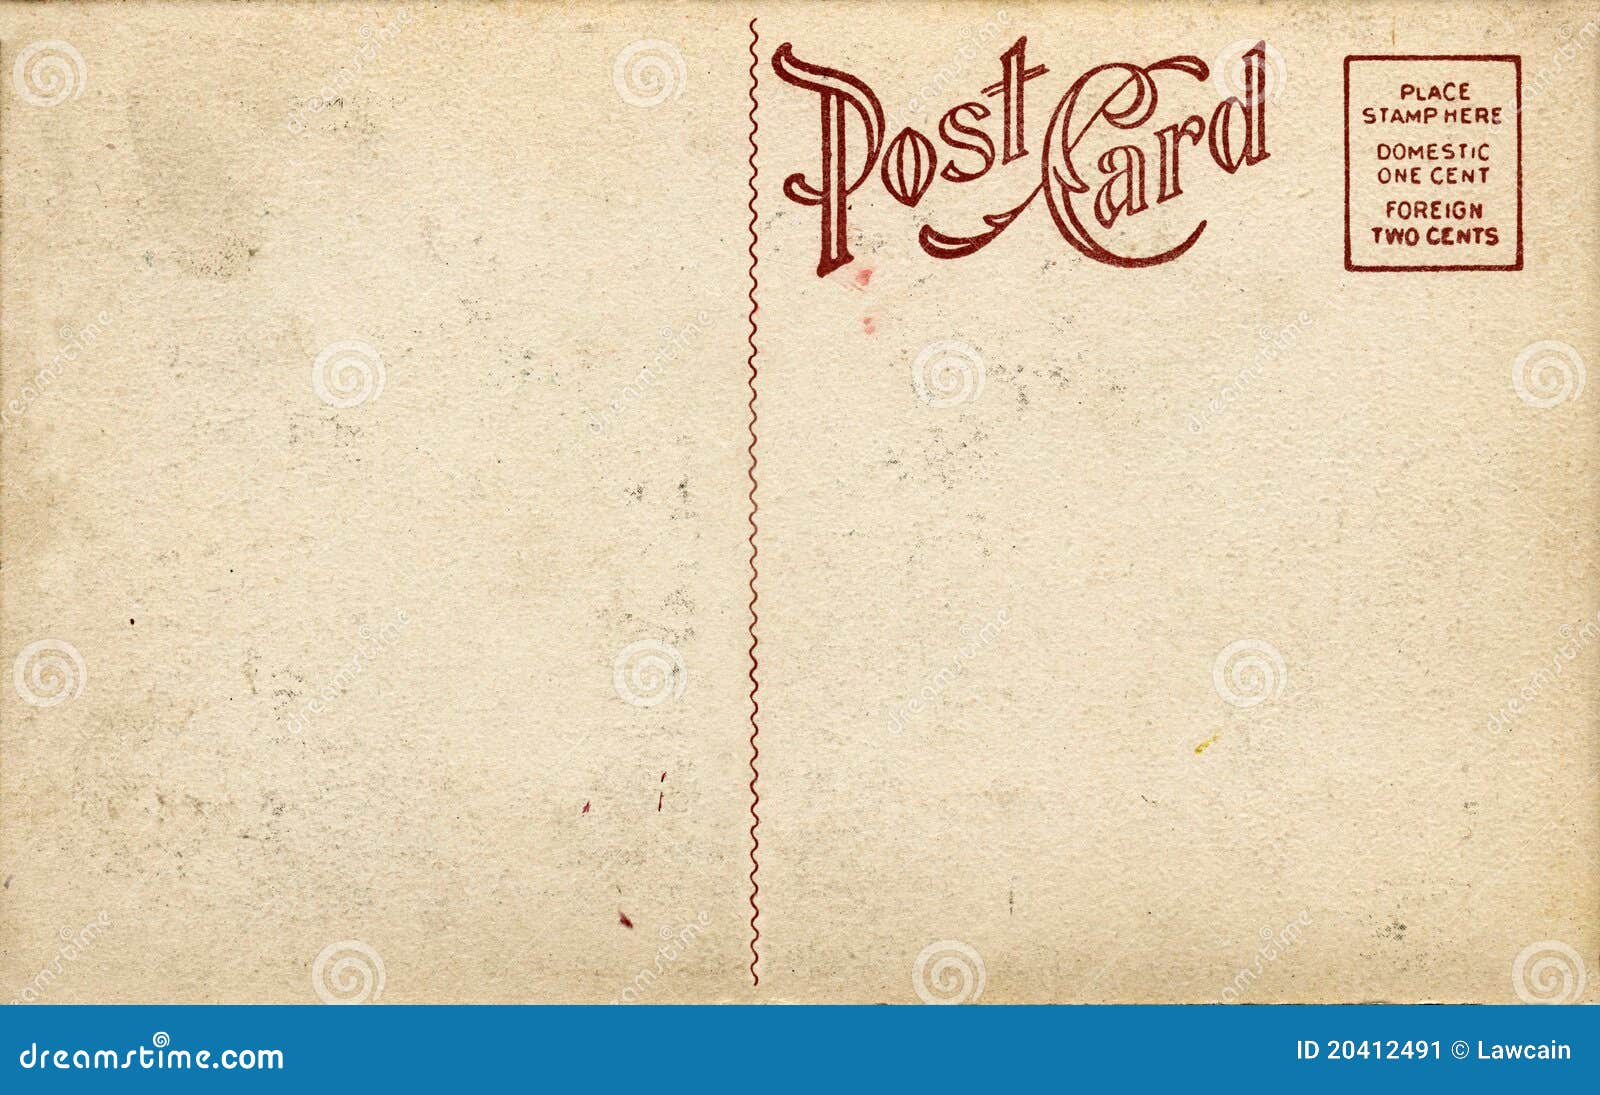 old-fashioned-postcard-stock-image-image-20412491